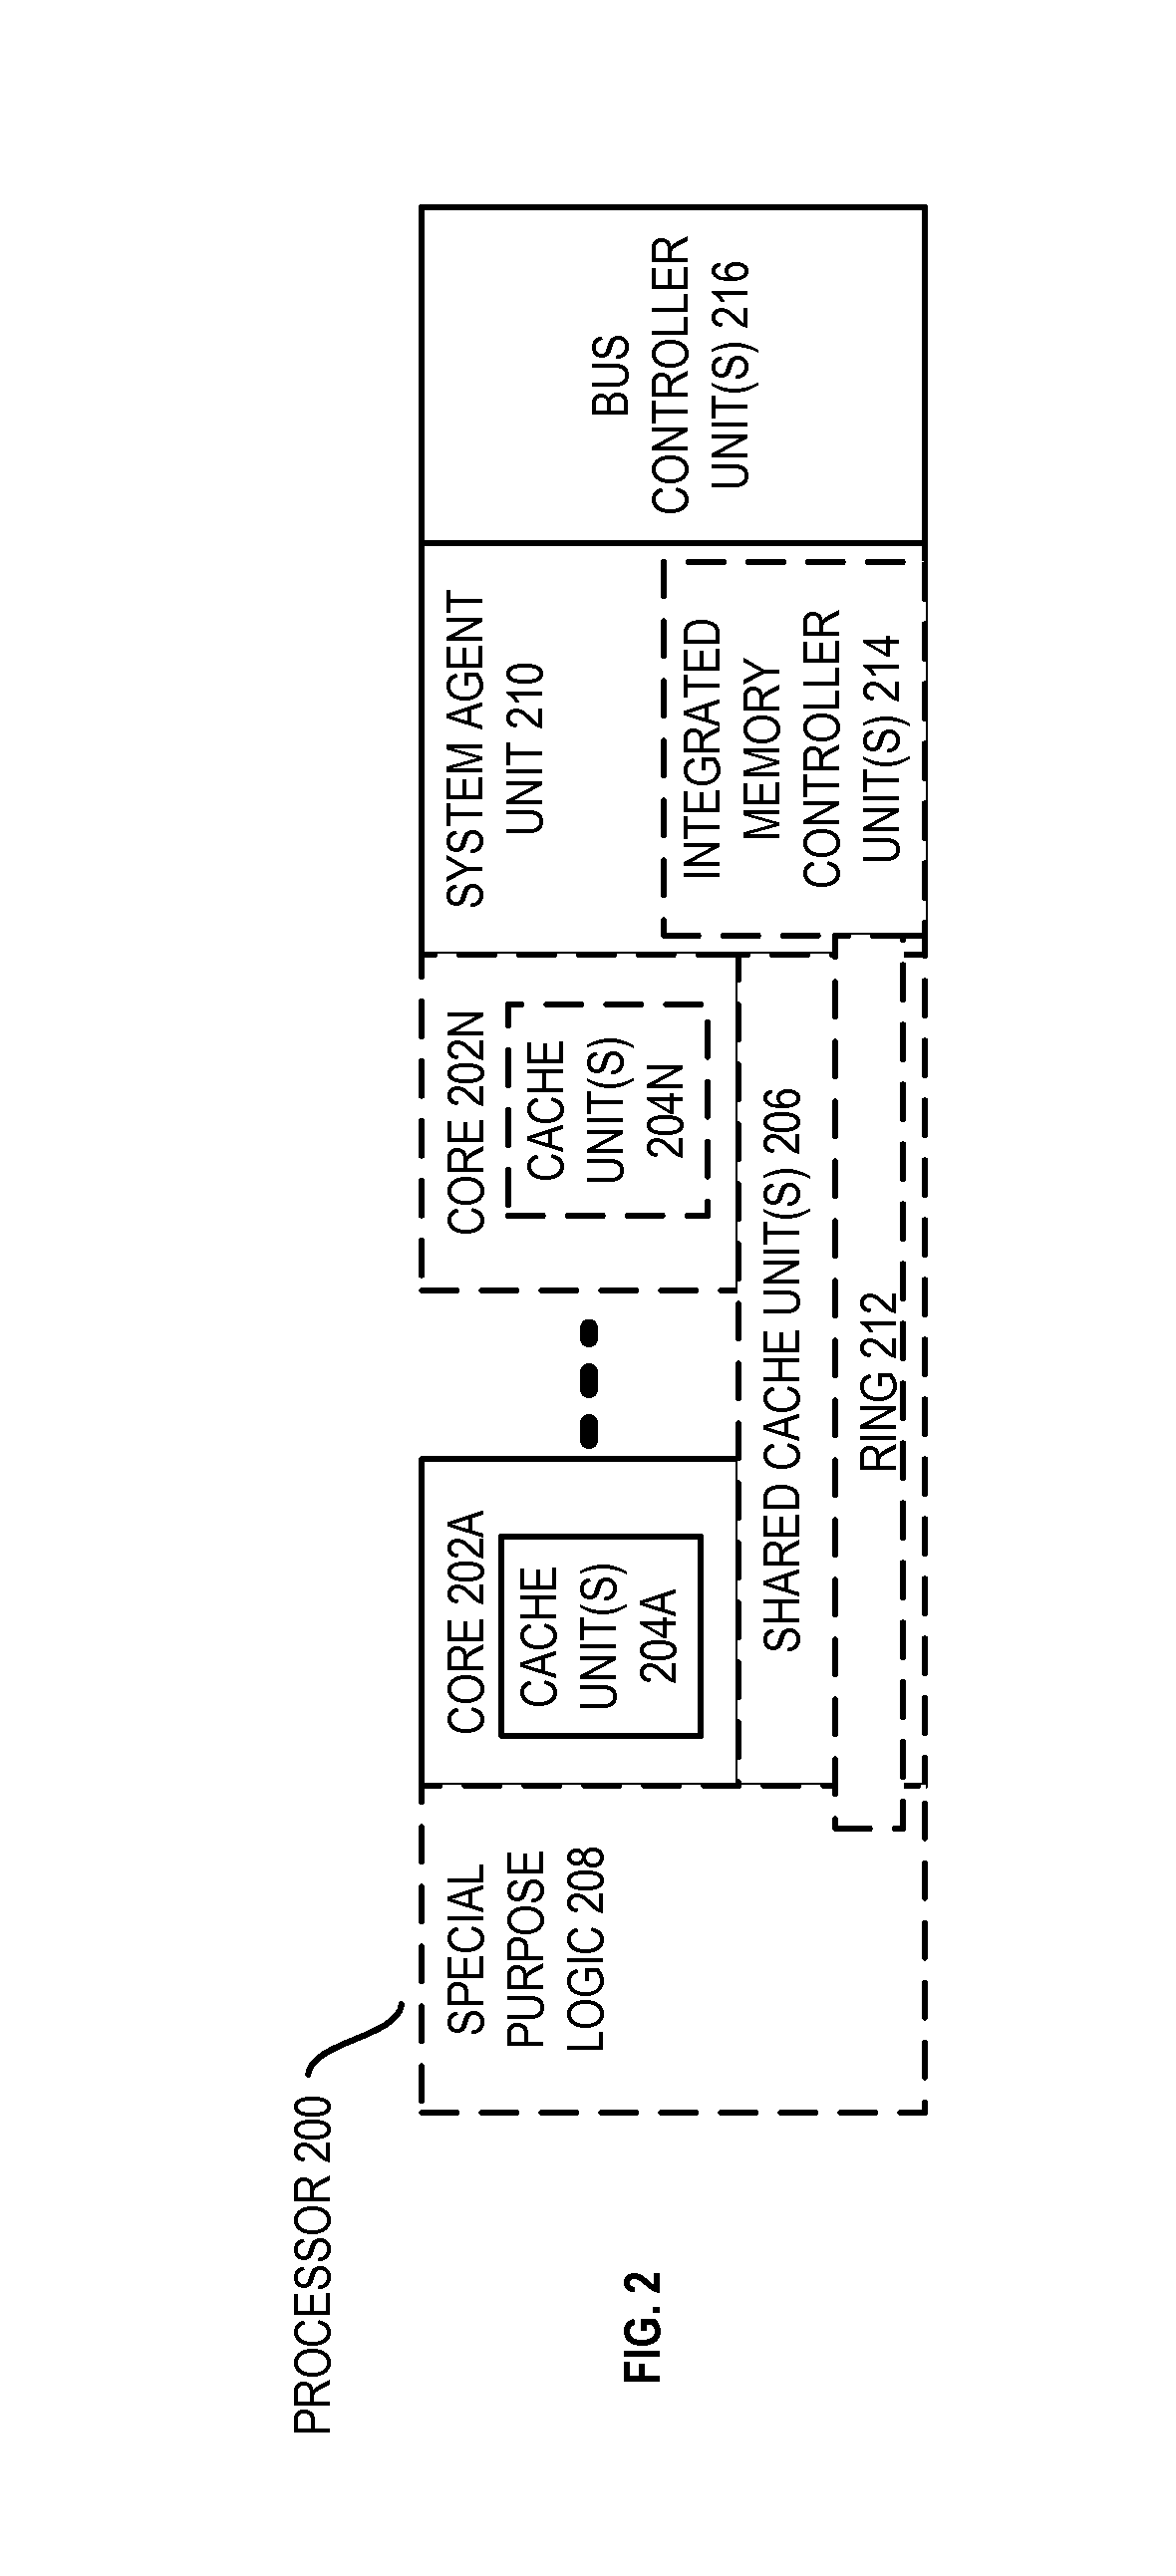 Method and apparatus for efficient, low power finite state transducer decoding